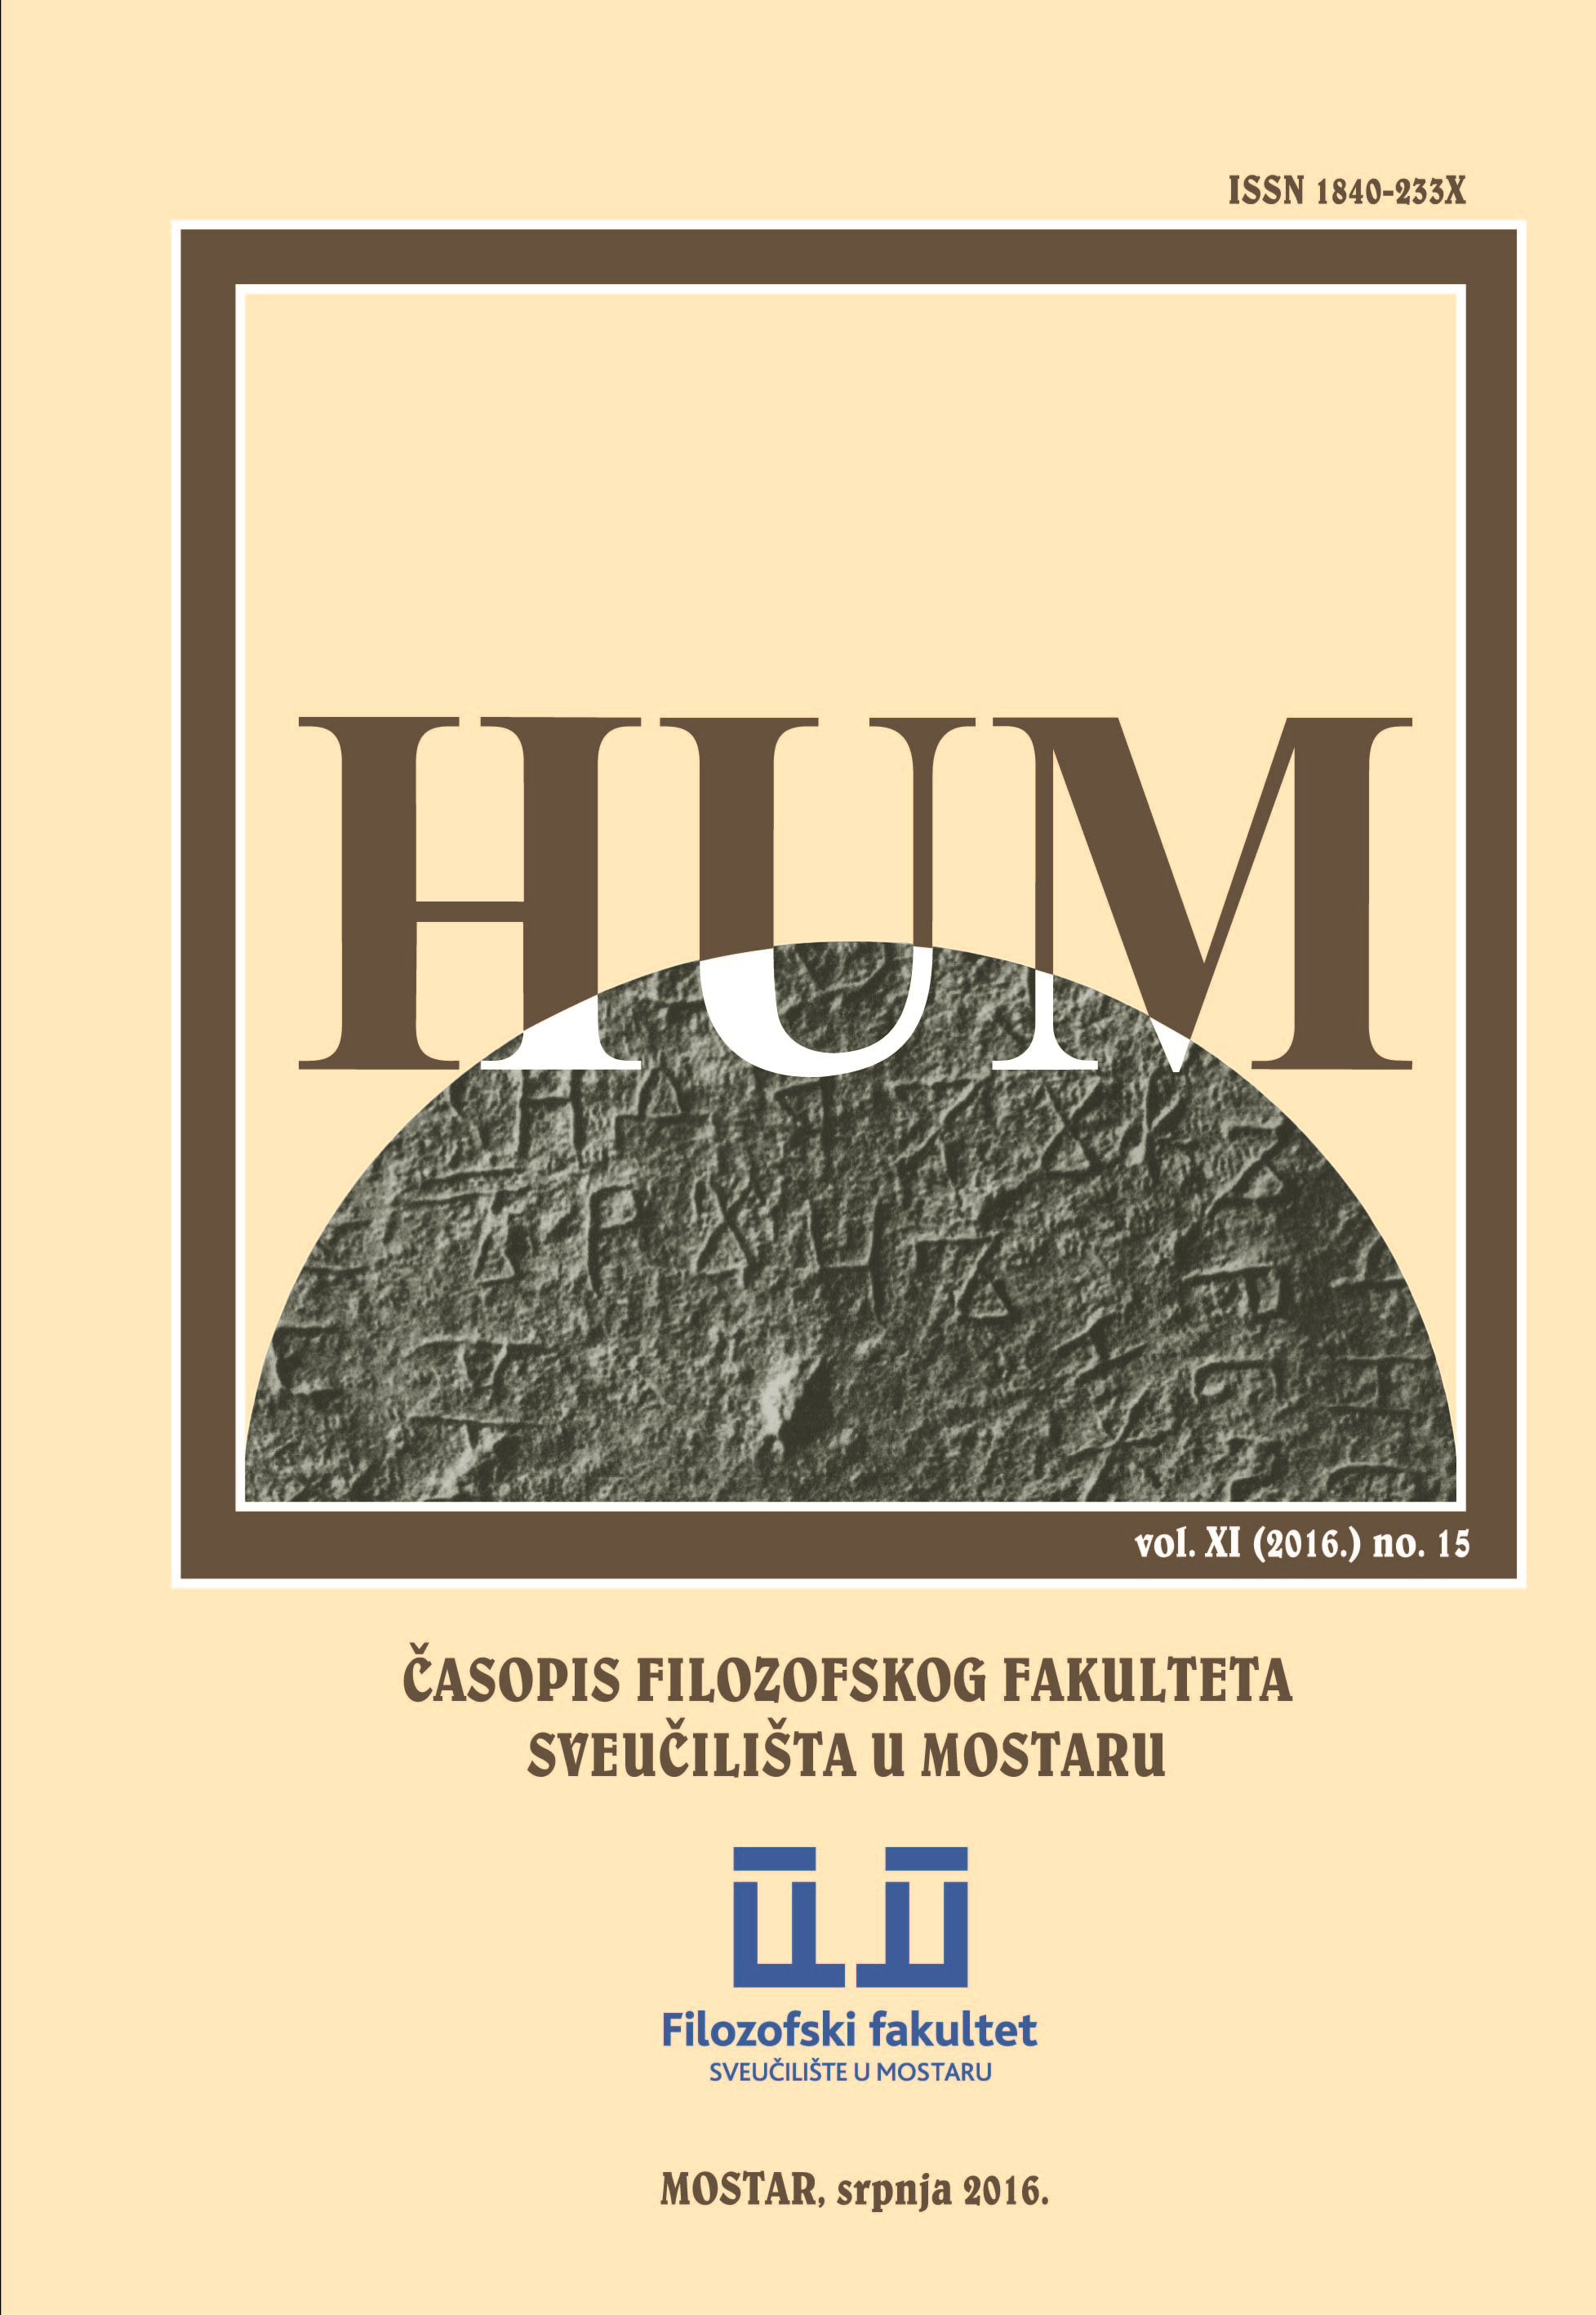 A speech by his excellency archbishop mons. Luigi Pezzuto, apostolic nuncio while visiting the Faculty of Humanities and Social Sciences at University of Mostar (9. june 2016.) Cover Image